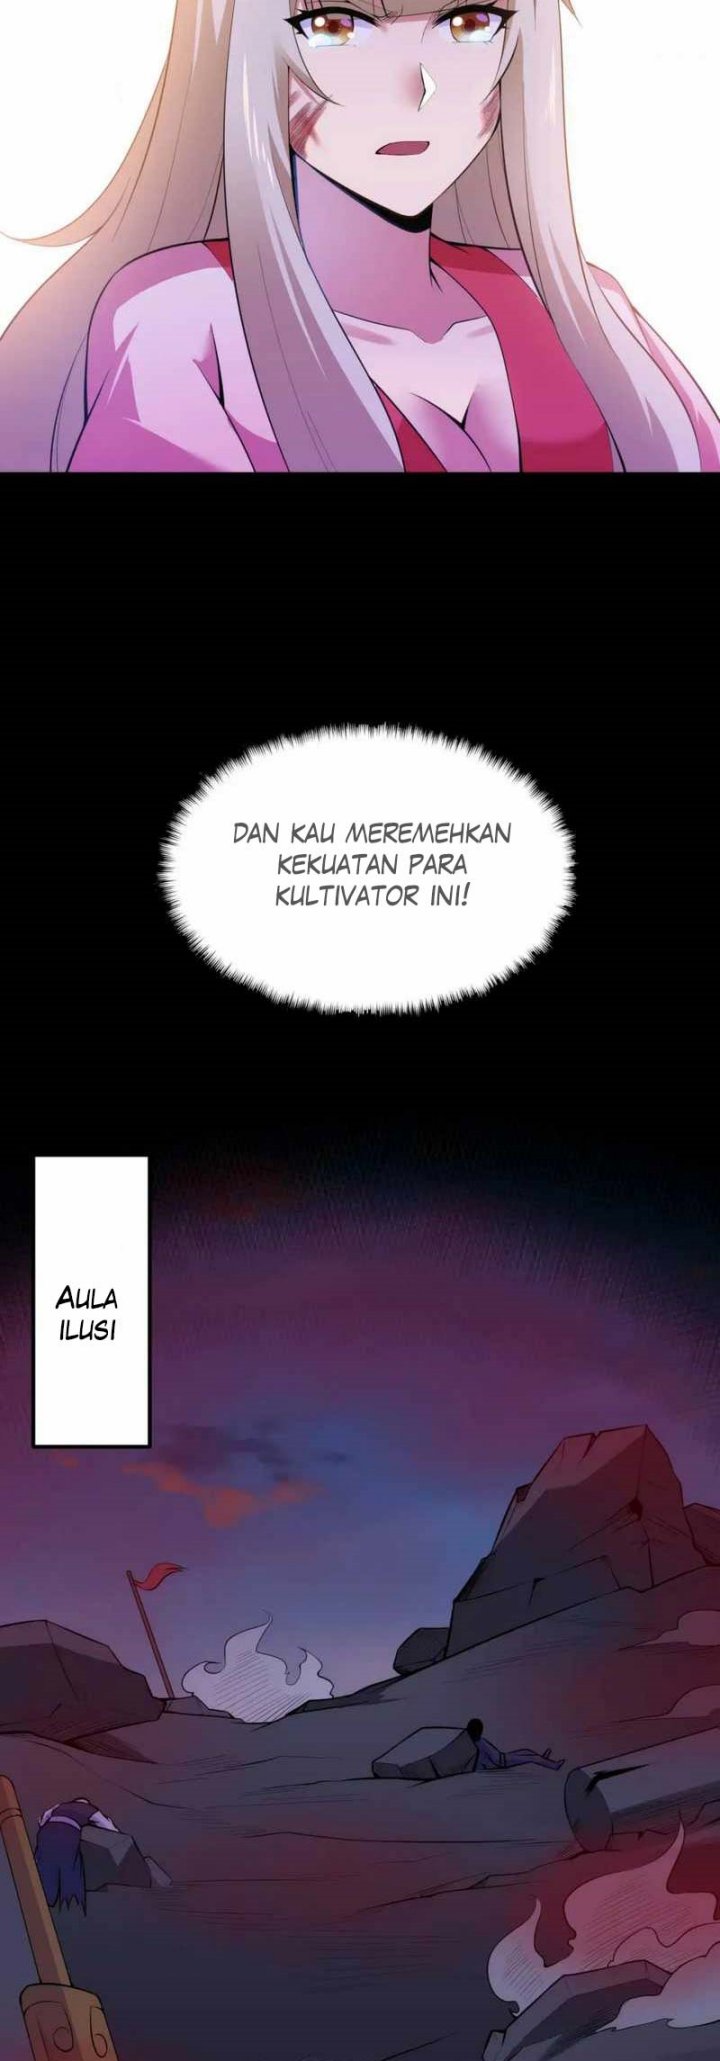 Dilarang COPAS - situs resmi www.mangacanblog.com - Komik i just want to be beaten to death by everyone 186 - chapter 186 187 Indonesia i just want to be beaten to death by everyone 186 - chapter 186 Terbaru 5|Baca Manga Komik Indonesia|Mangacan